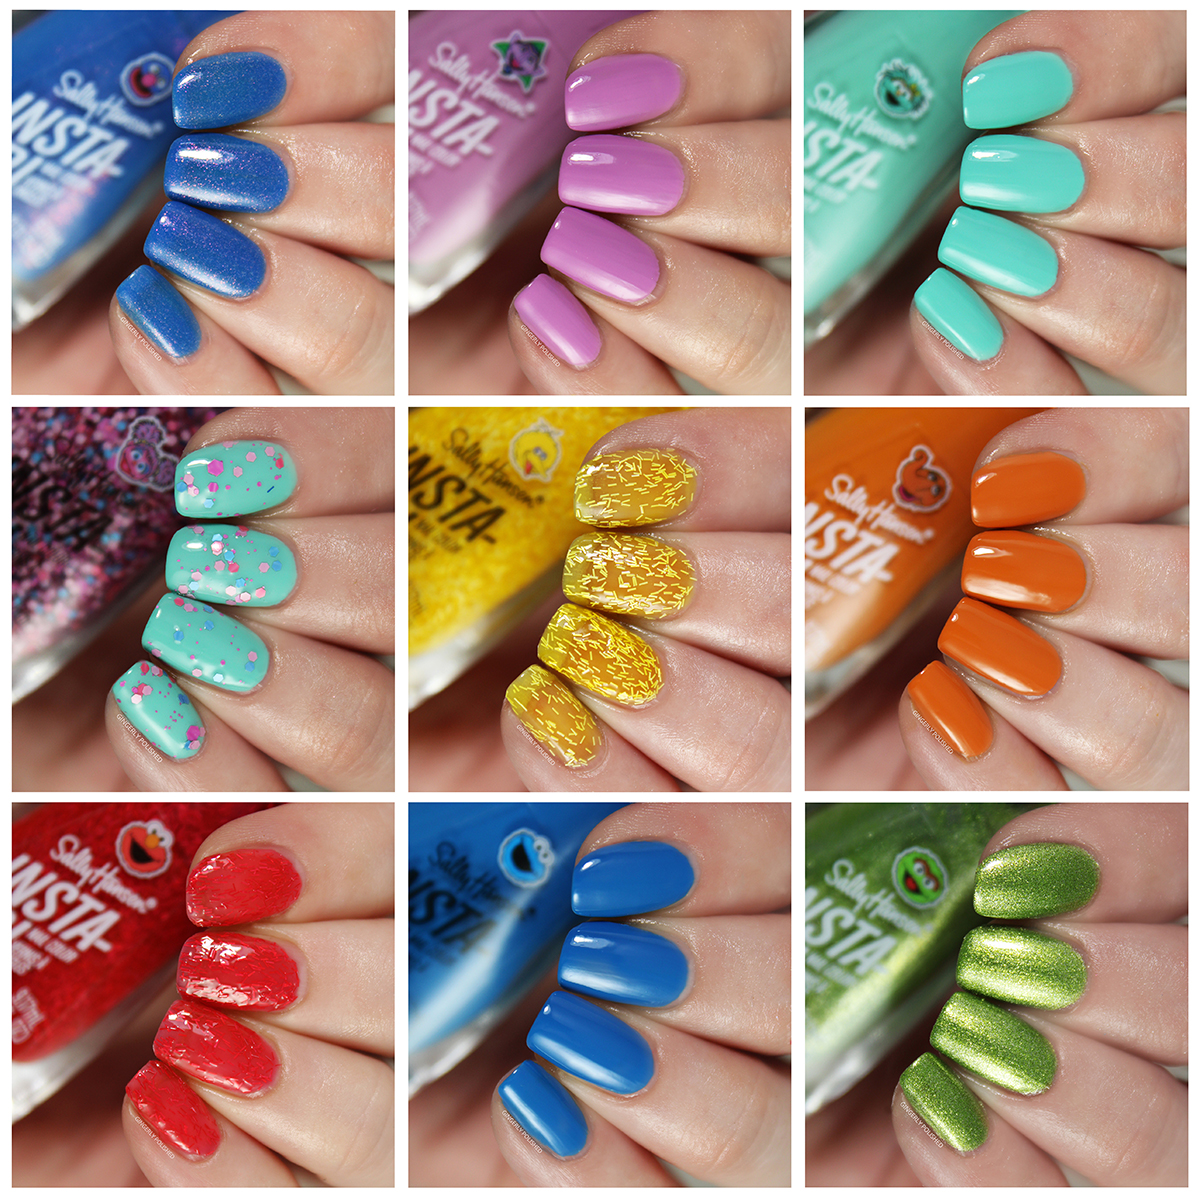 Sinful Colors LE Nail Polish swatches from Indie Sol and Boho Beat  Collections